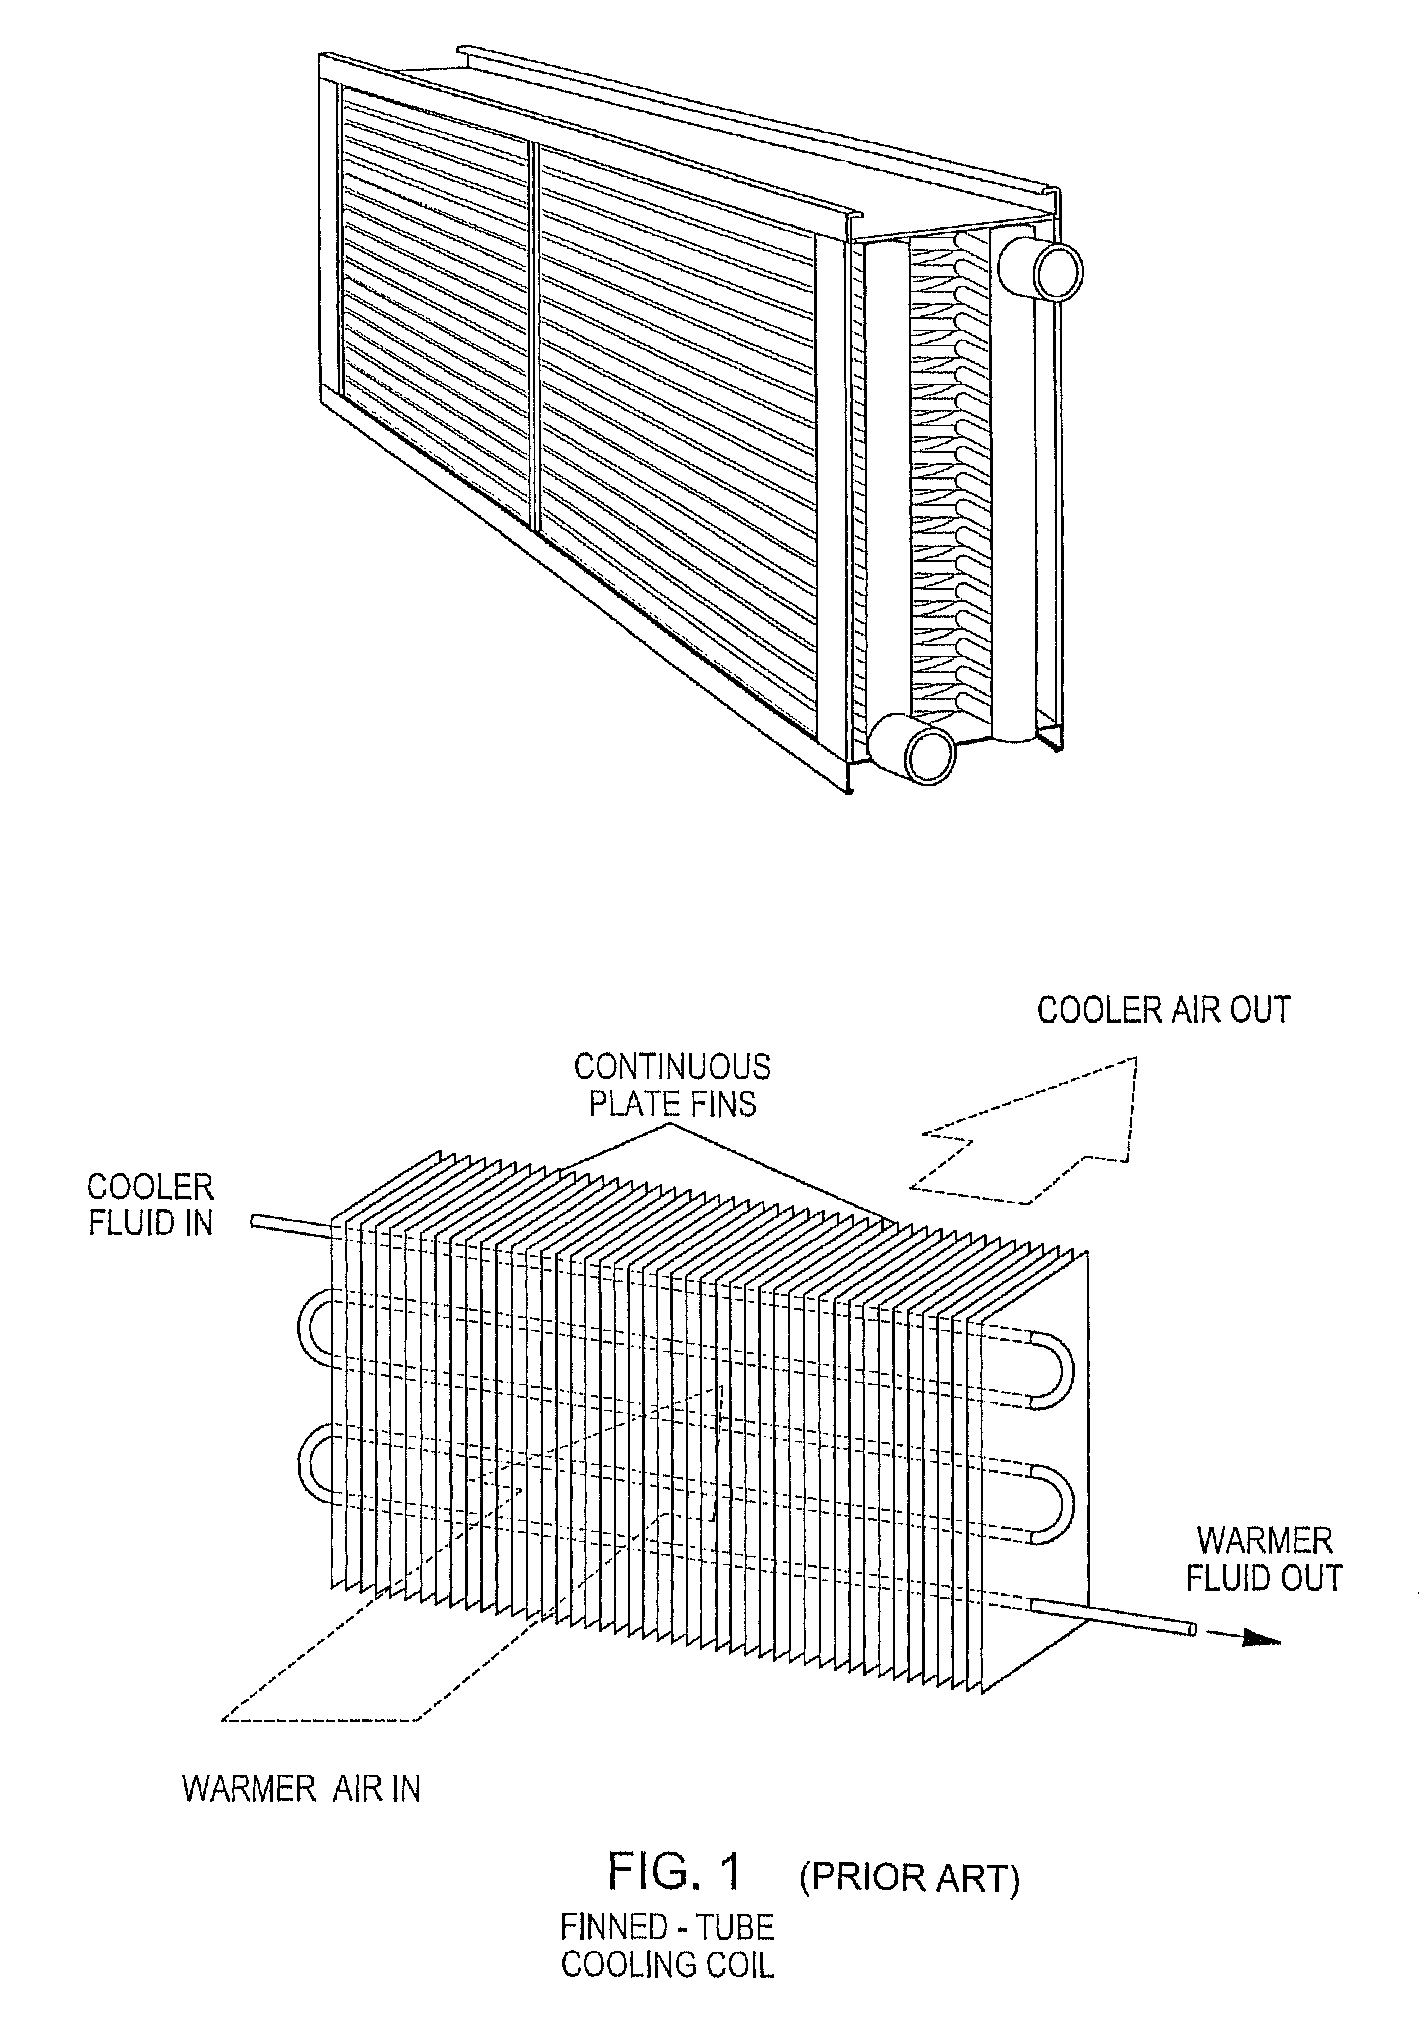 Low temperature cooling and dehumidification device with reversing airflow defrost for applications where cooling coil inlet air is above freezing